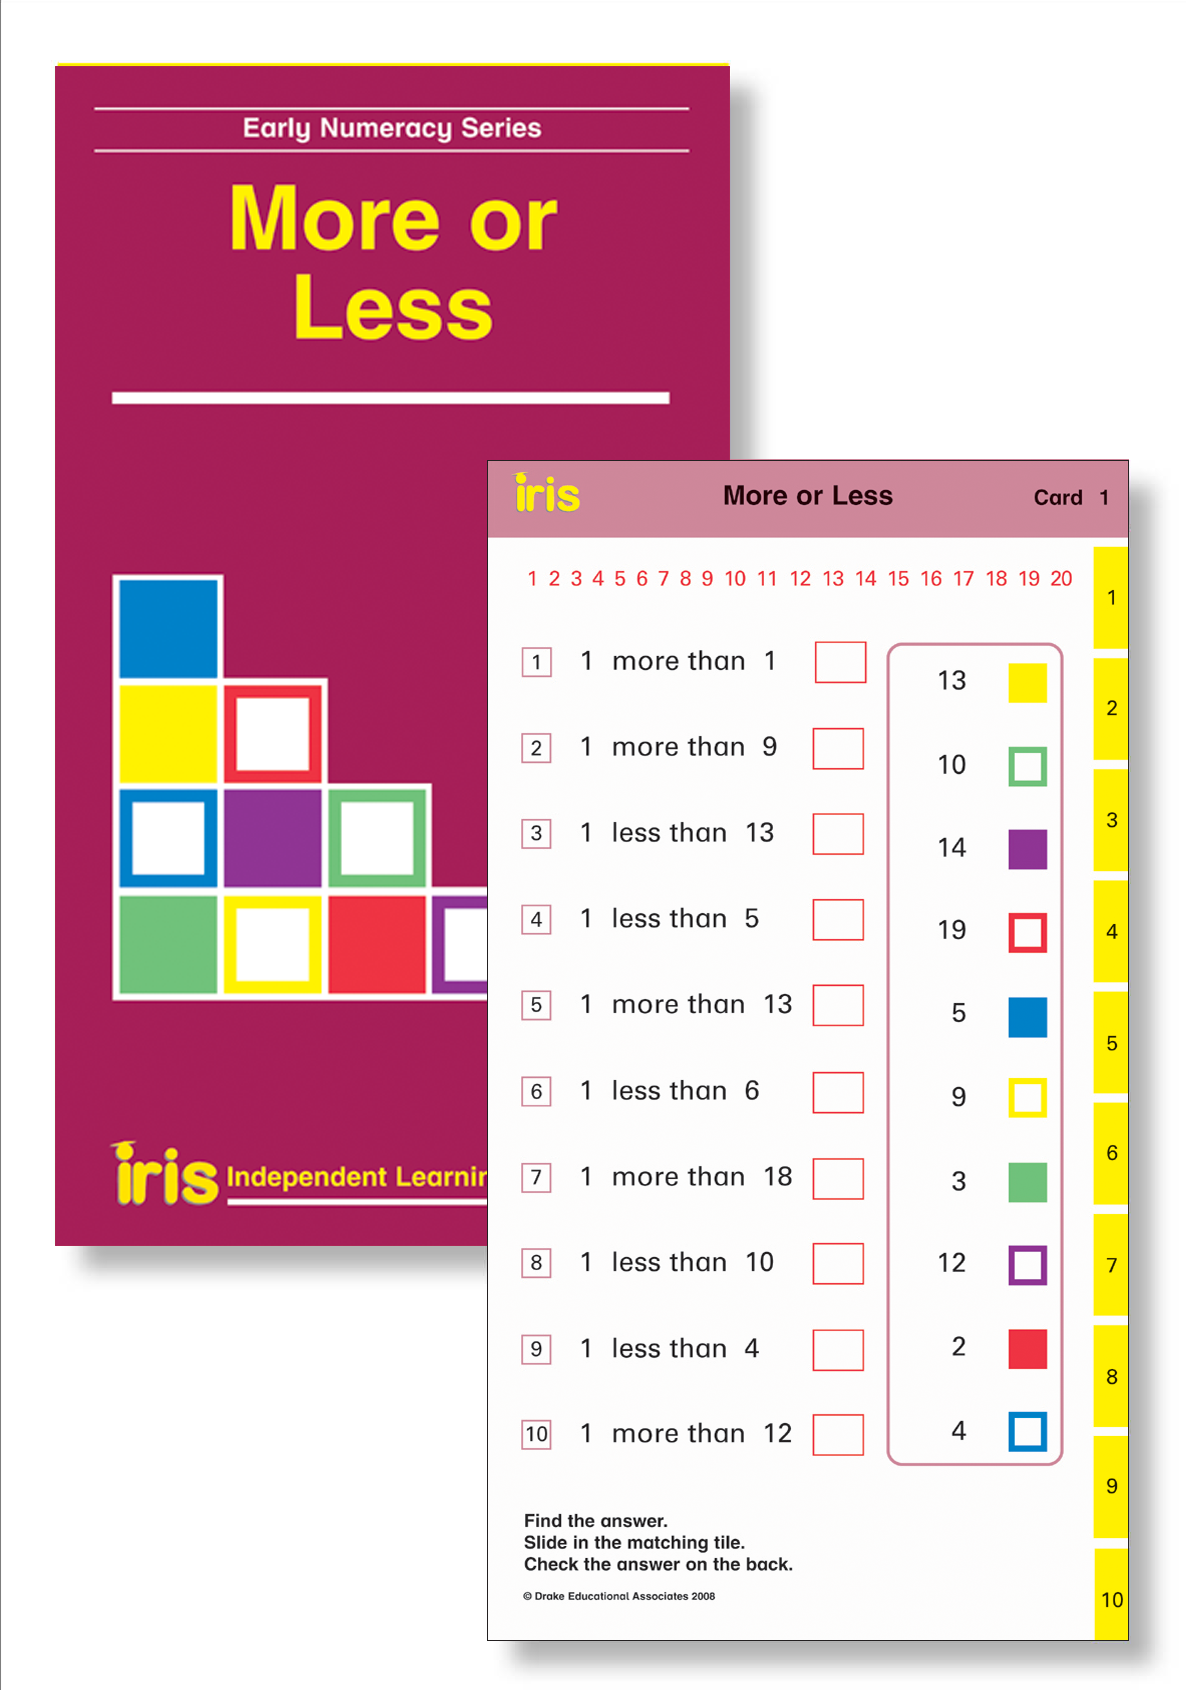 Iris Study Cards: Early Numeracy Year 1 - More or Less